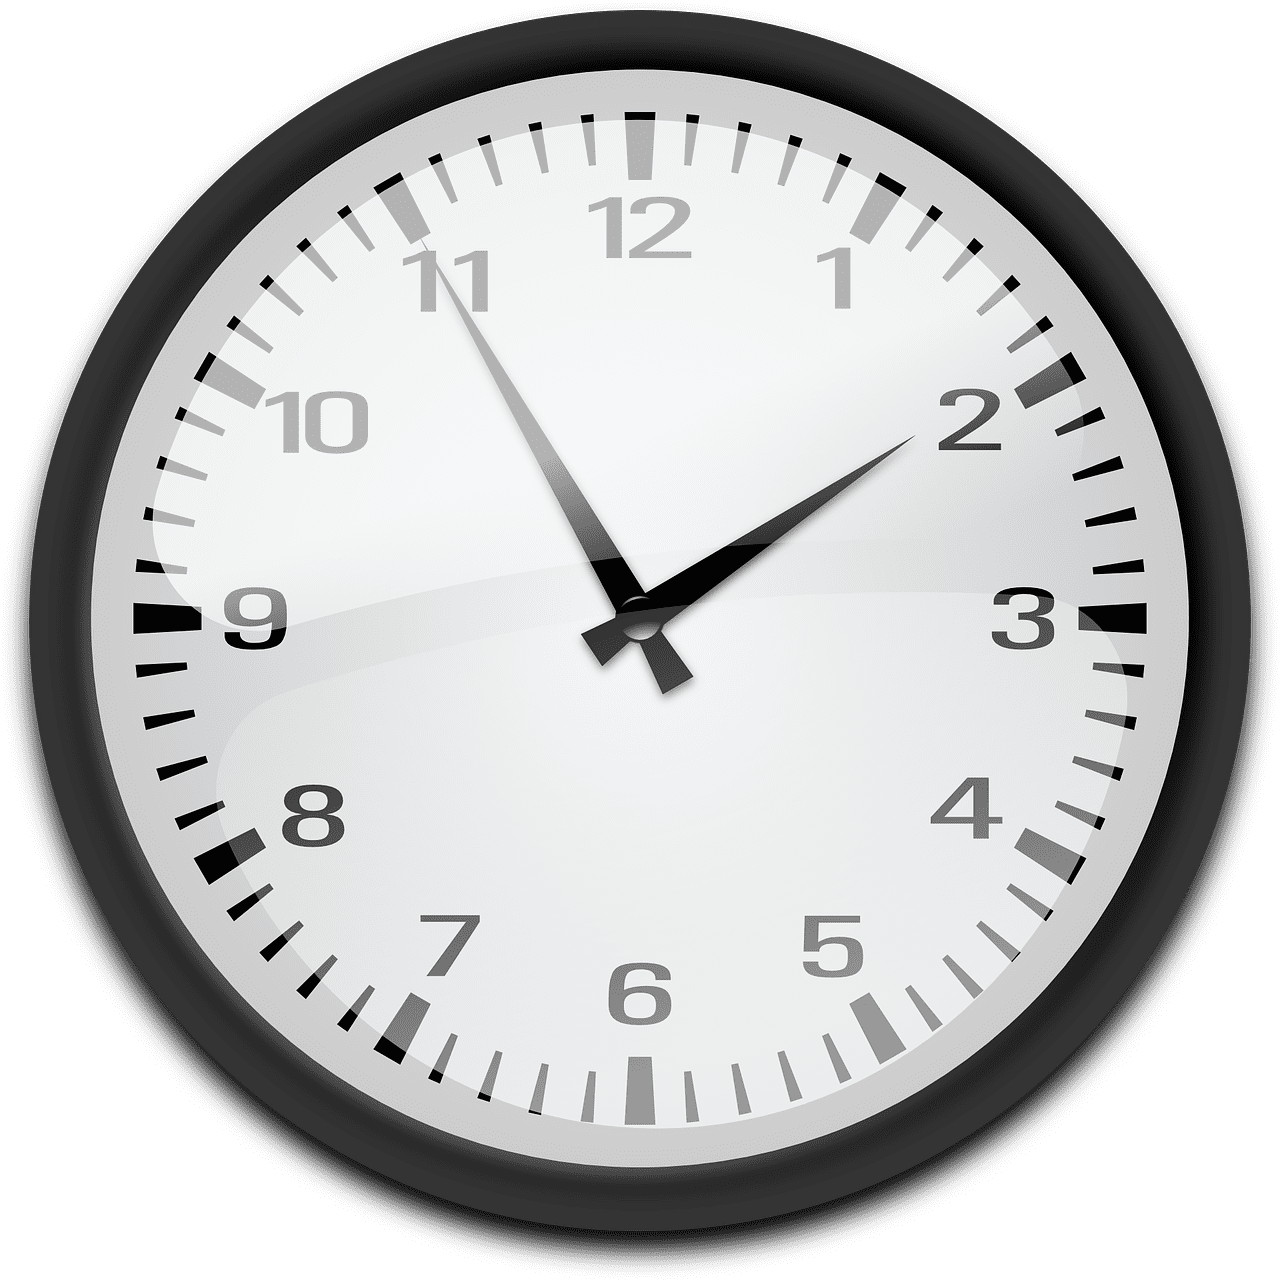 Would his watch be set correctly? | Photo: Pixabay/OpenClipart-Vectors